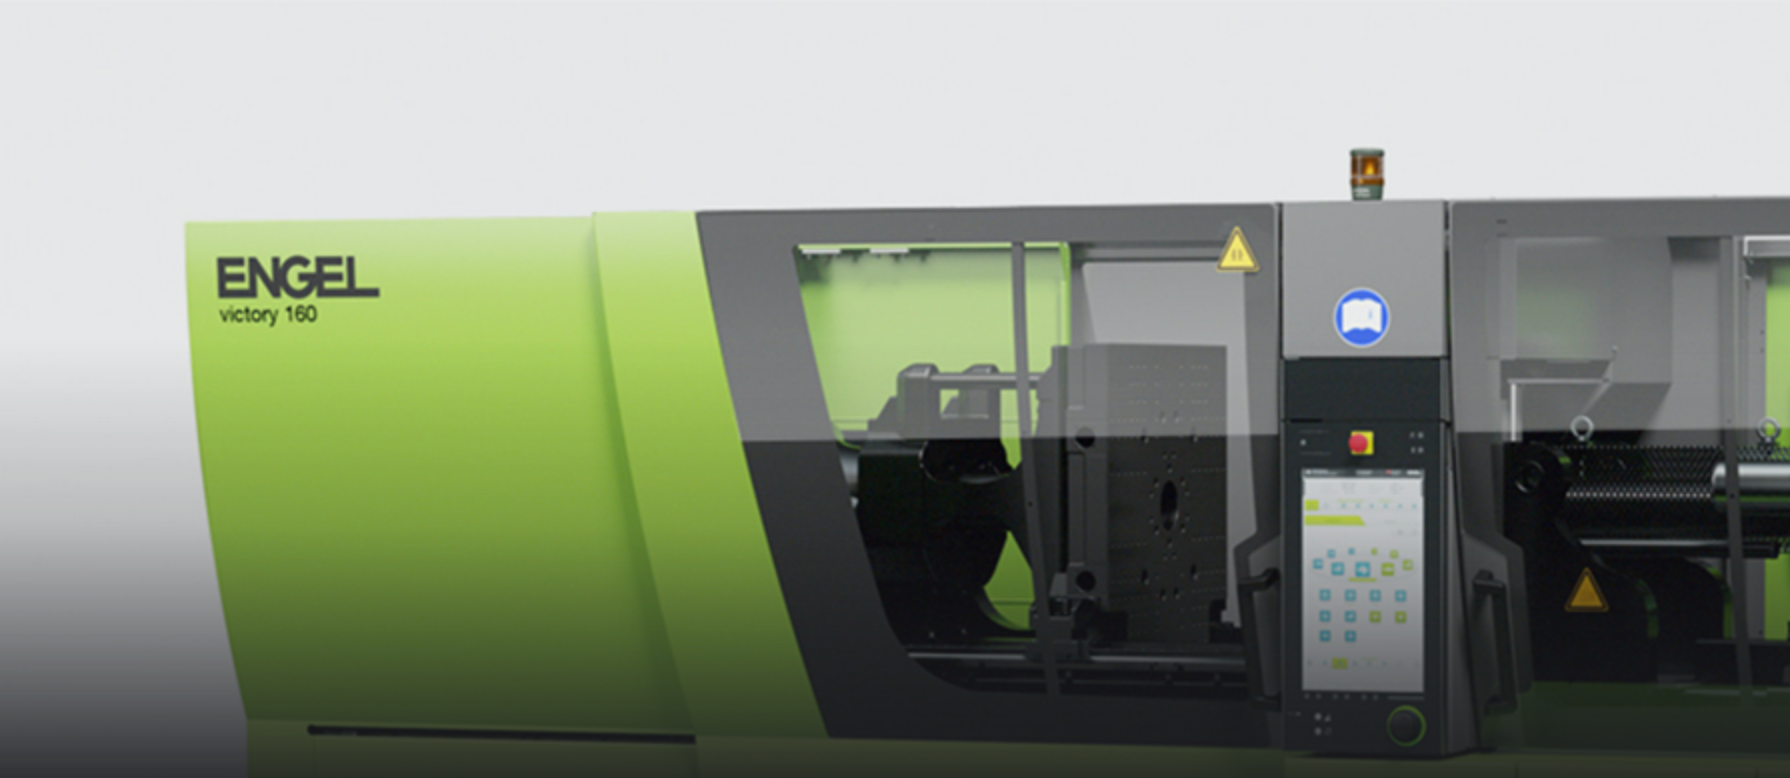 ENGEL injection moulding machine close up